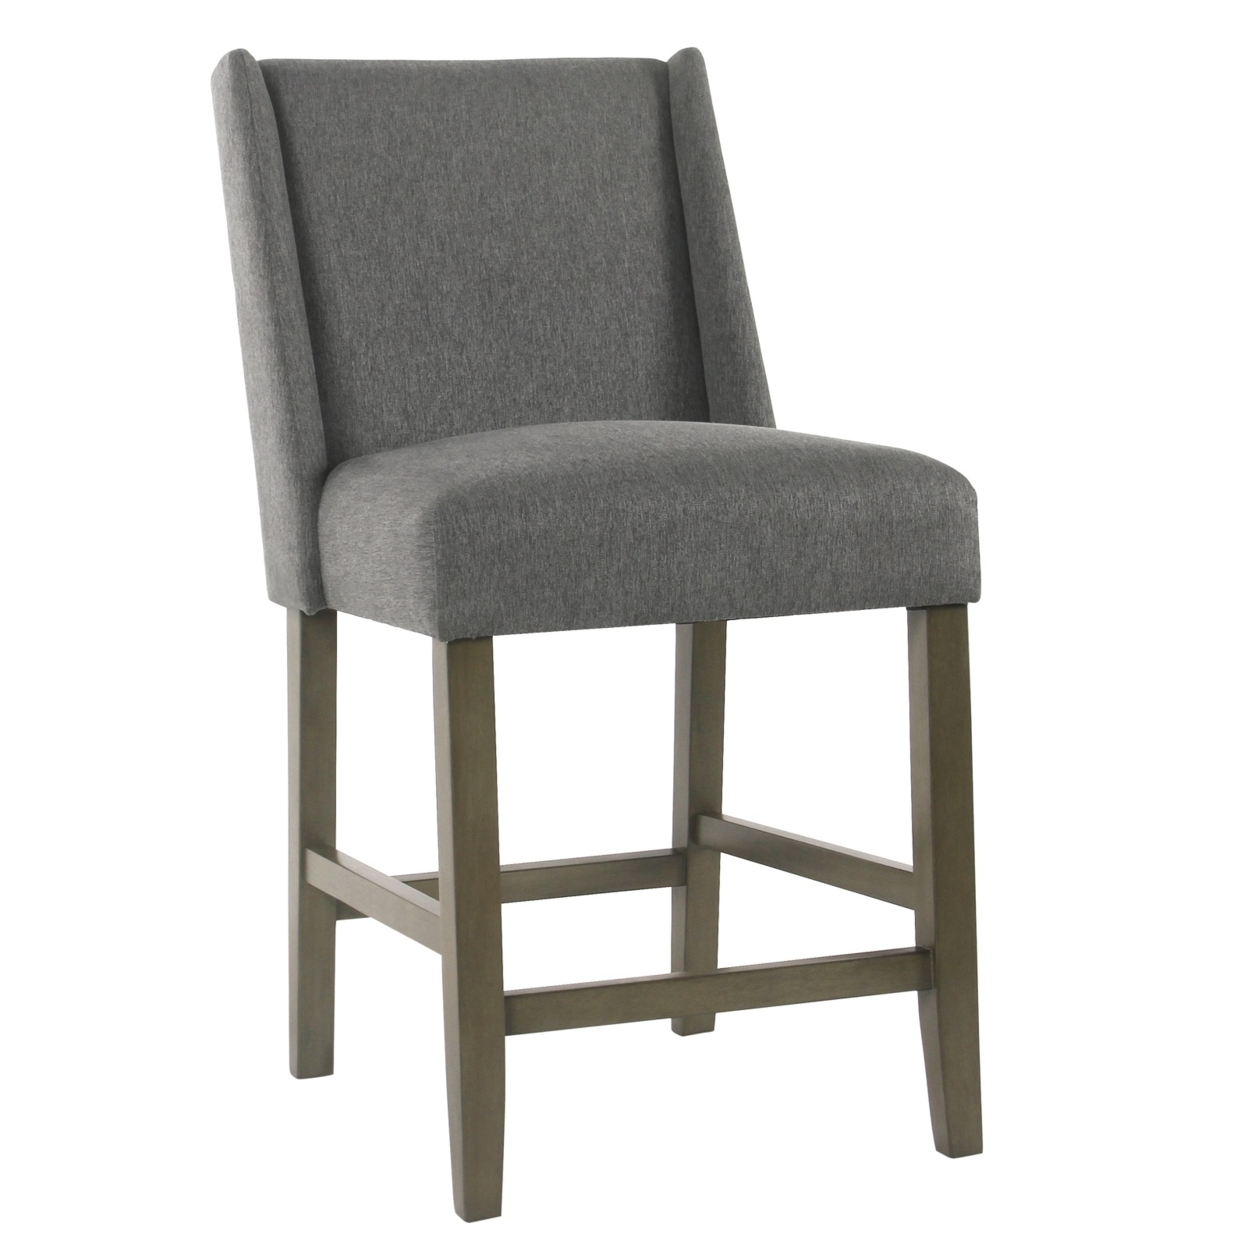 Fabric Upholstered Wooden Counter Stool With Curved Backrest And Cushion Seat, Dark Gray- Saltoro Sherpi